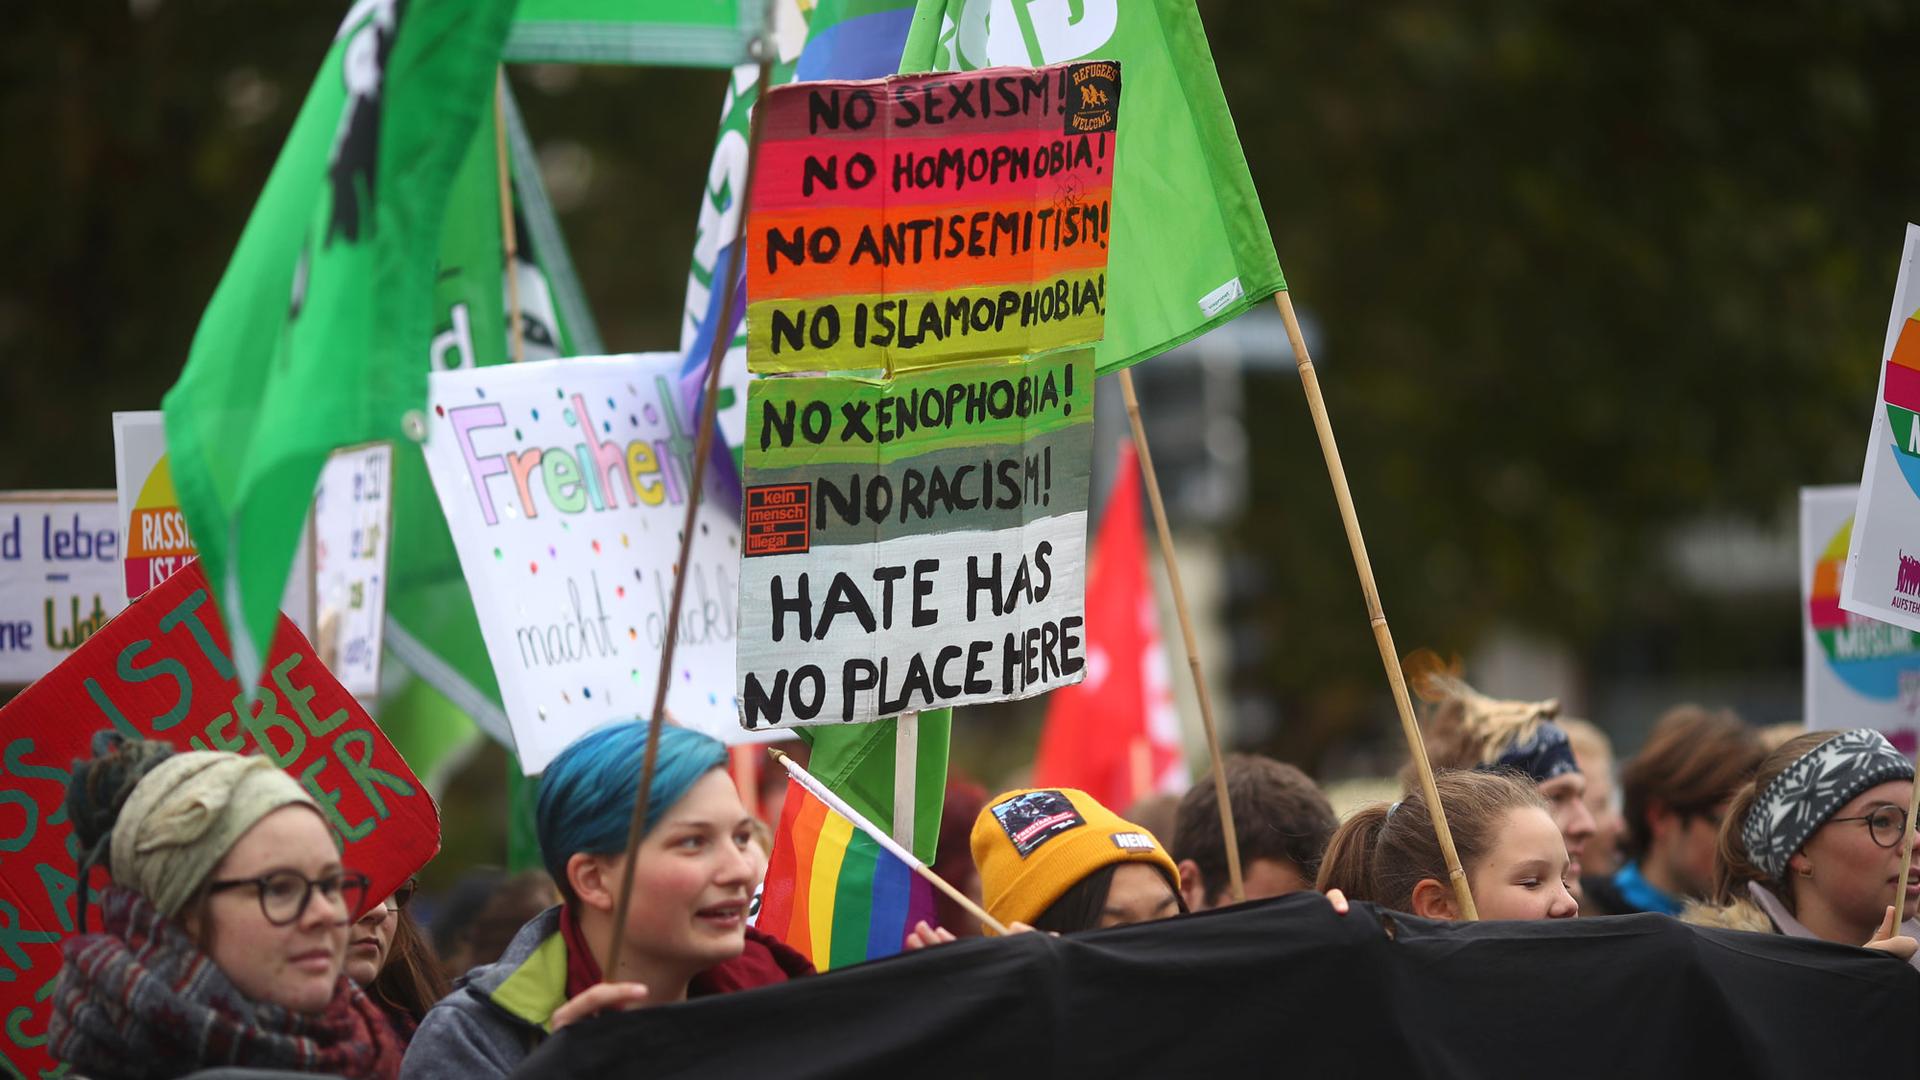 People are shown protesting against hate carrying flags and a brightly colored placard.